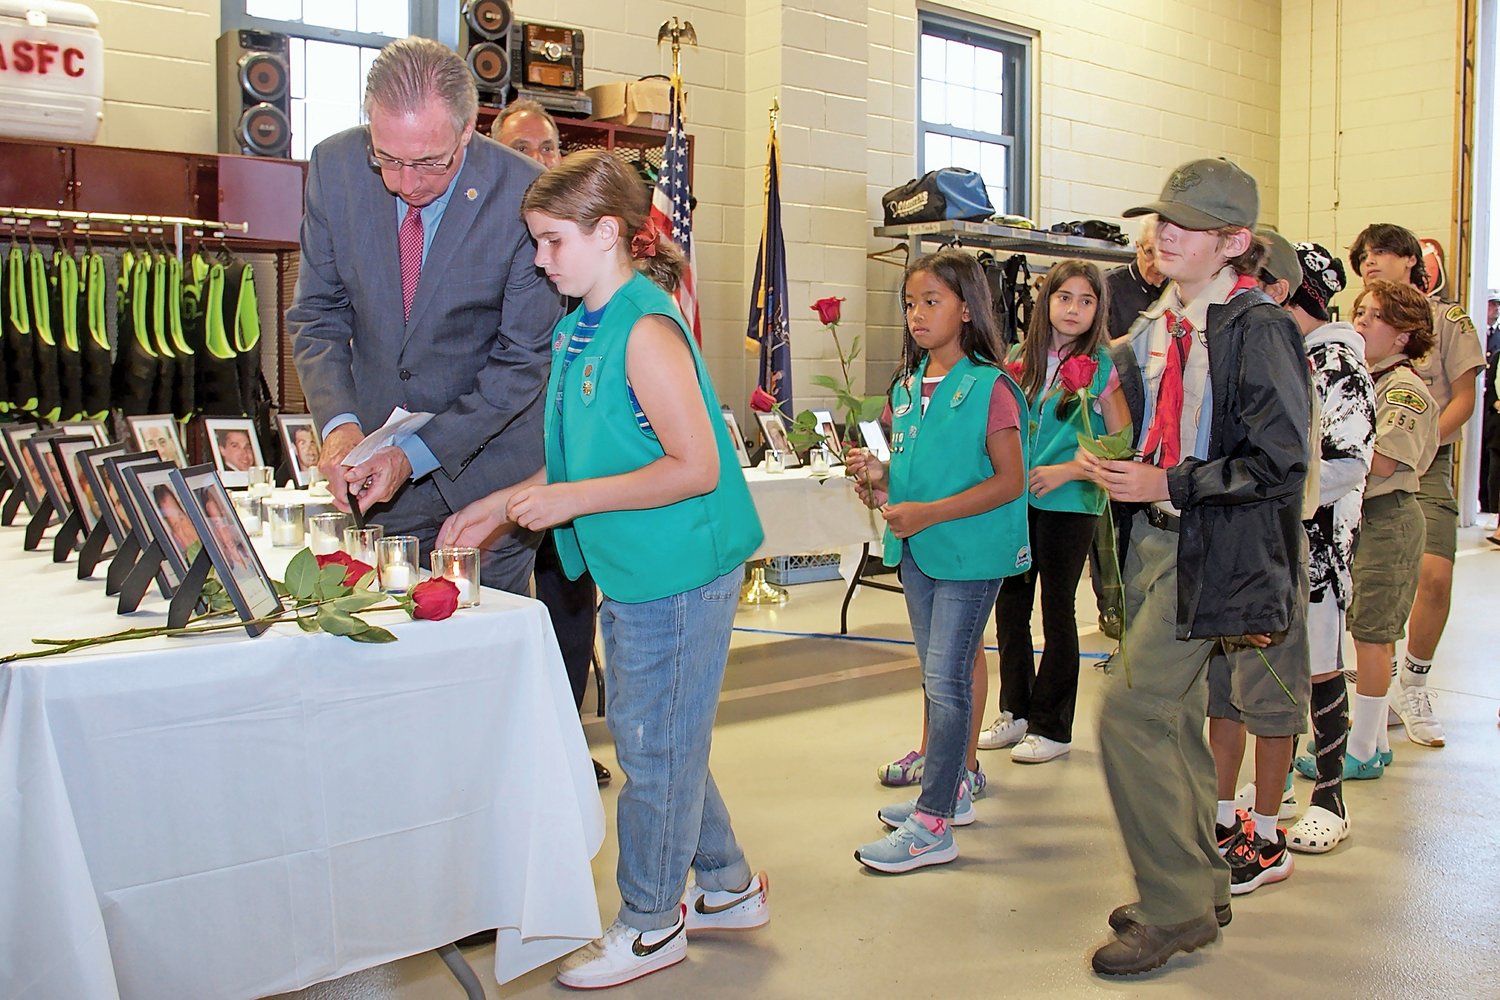 Boy Scouts participated in the 21st anniversary Sept. 11 ceremony in Oyster Bay by laying a rose next to the photographs of the victims, as State Sen. James Gaughran lit a candle.